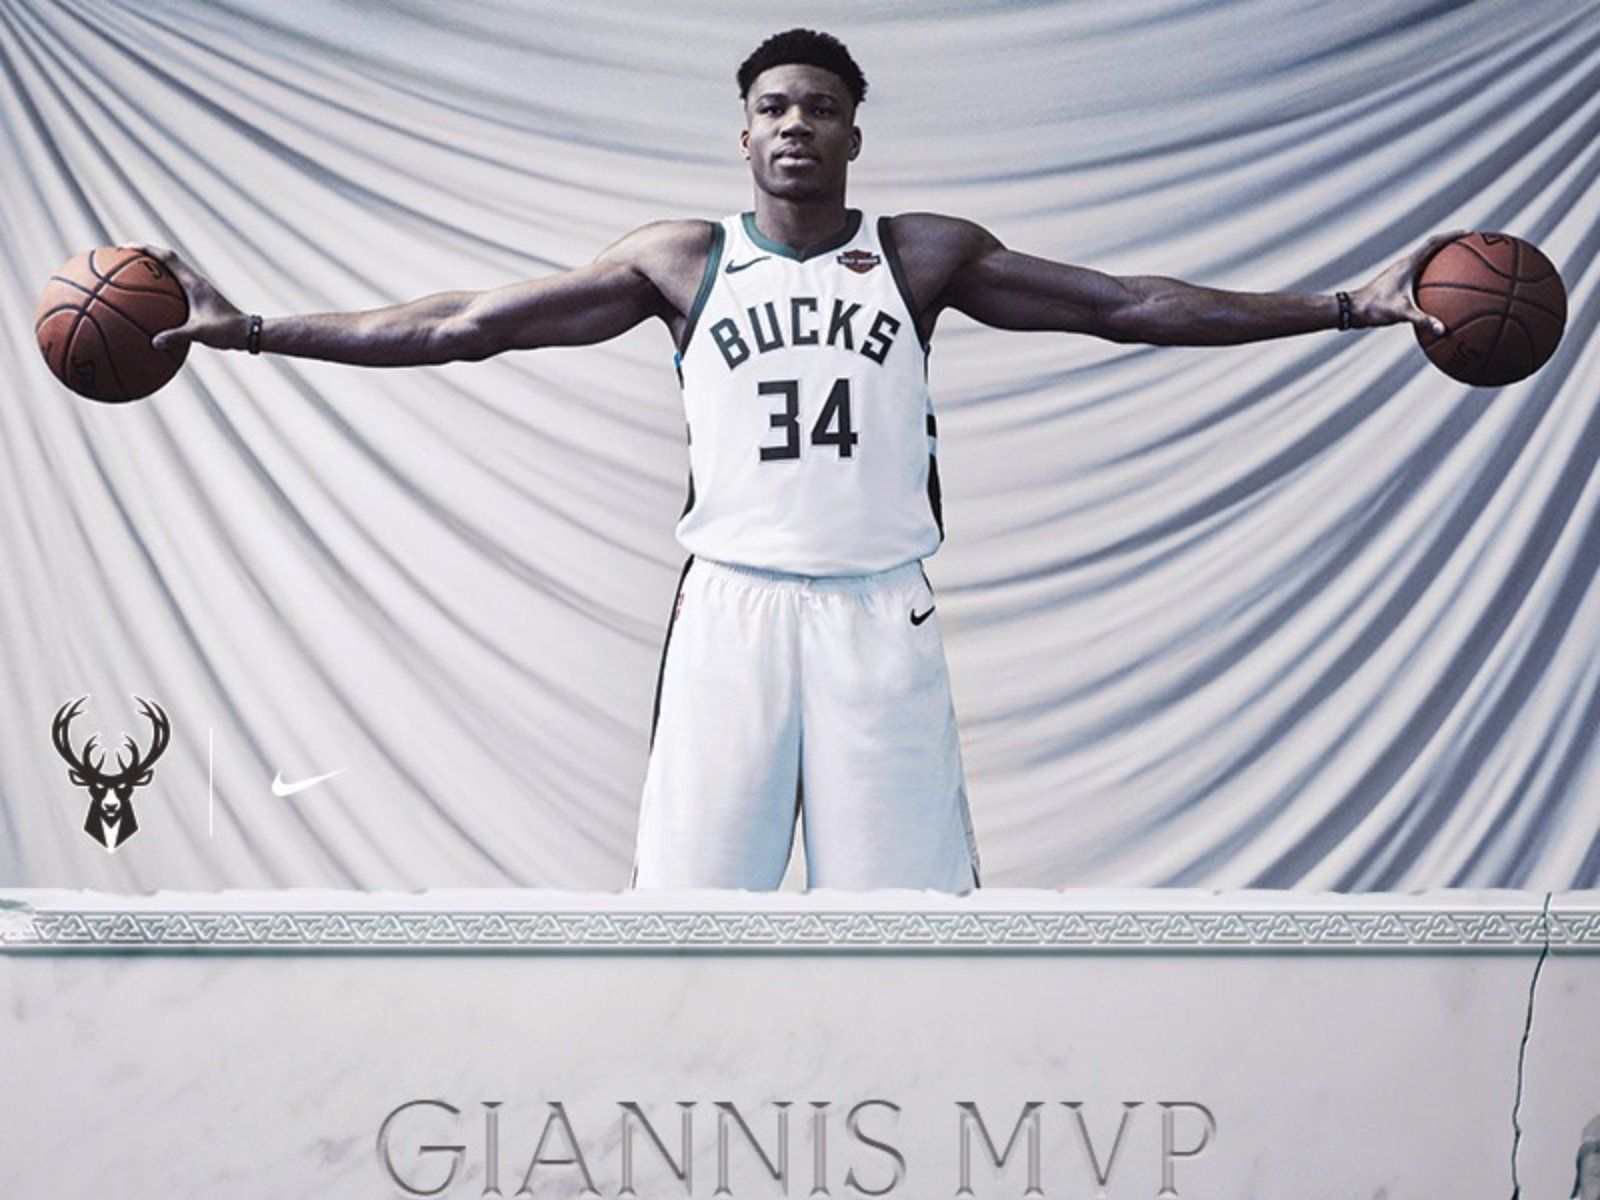 You're invited to Giannis' MVP celebration at Fiserv Forum on July